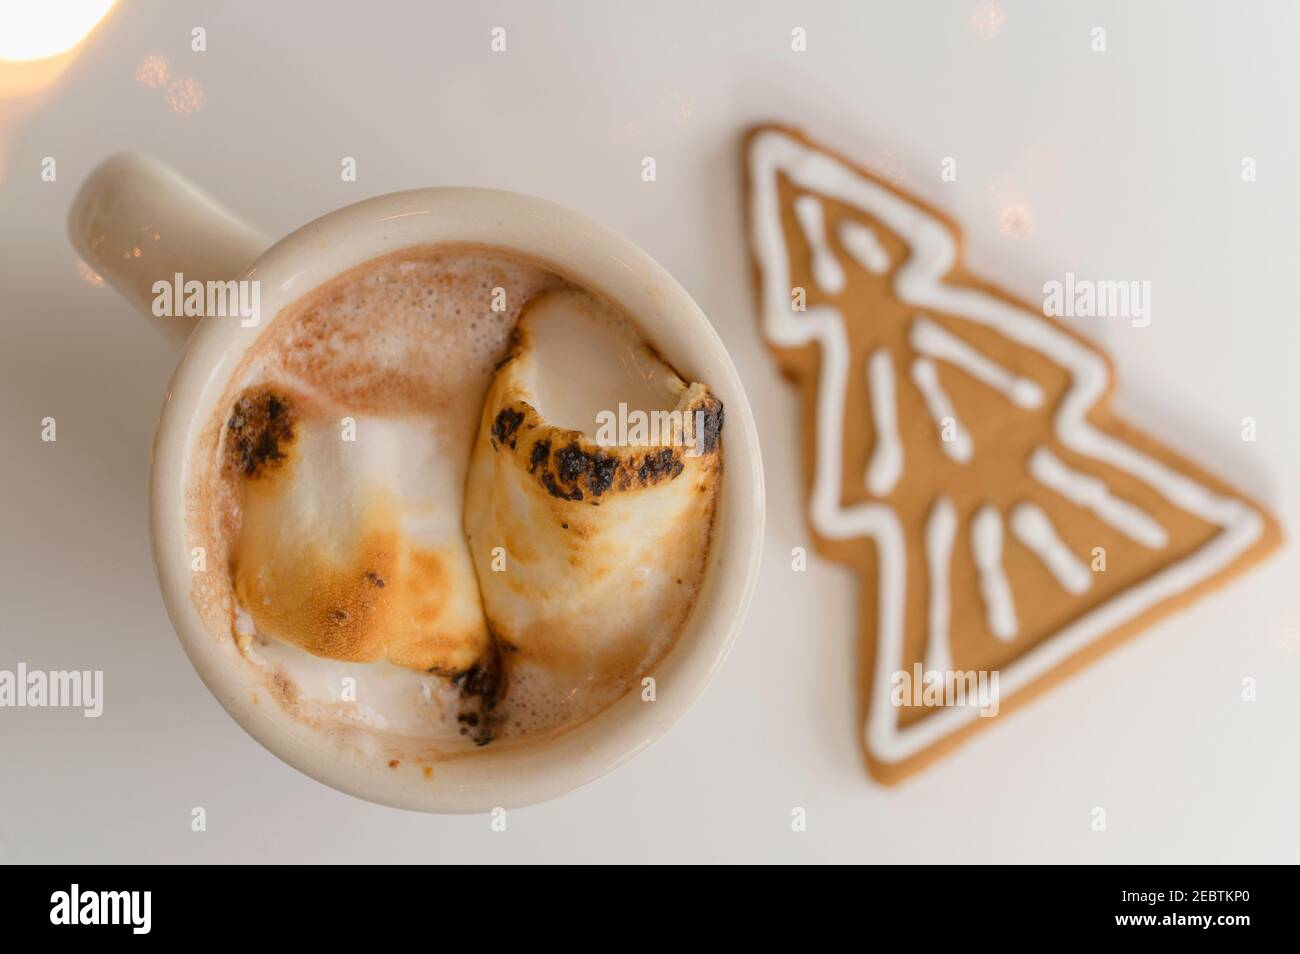 Hot cocoa with gingerbread cookie Stock Photo